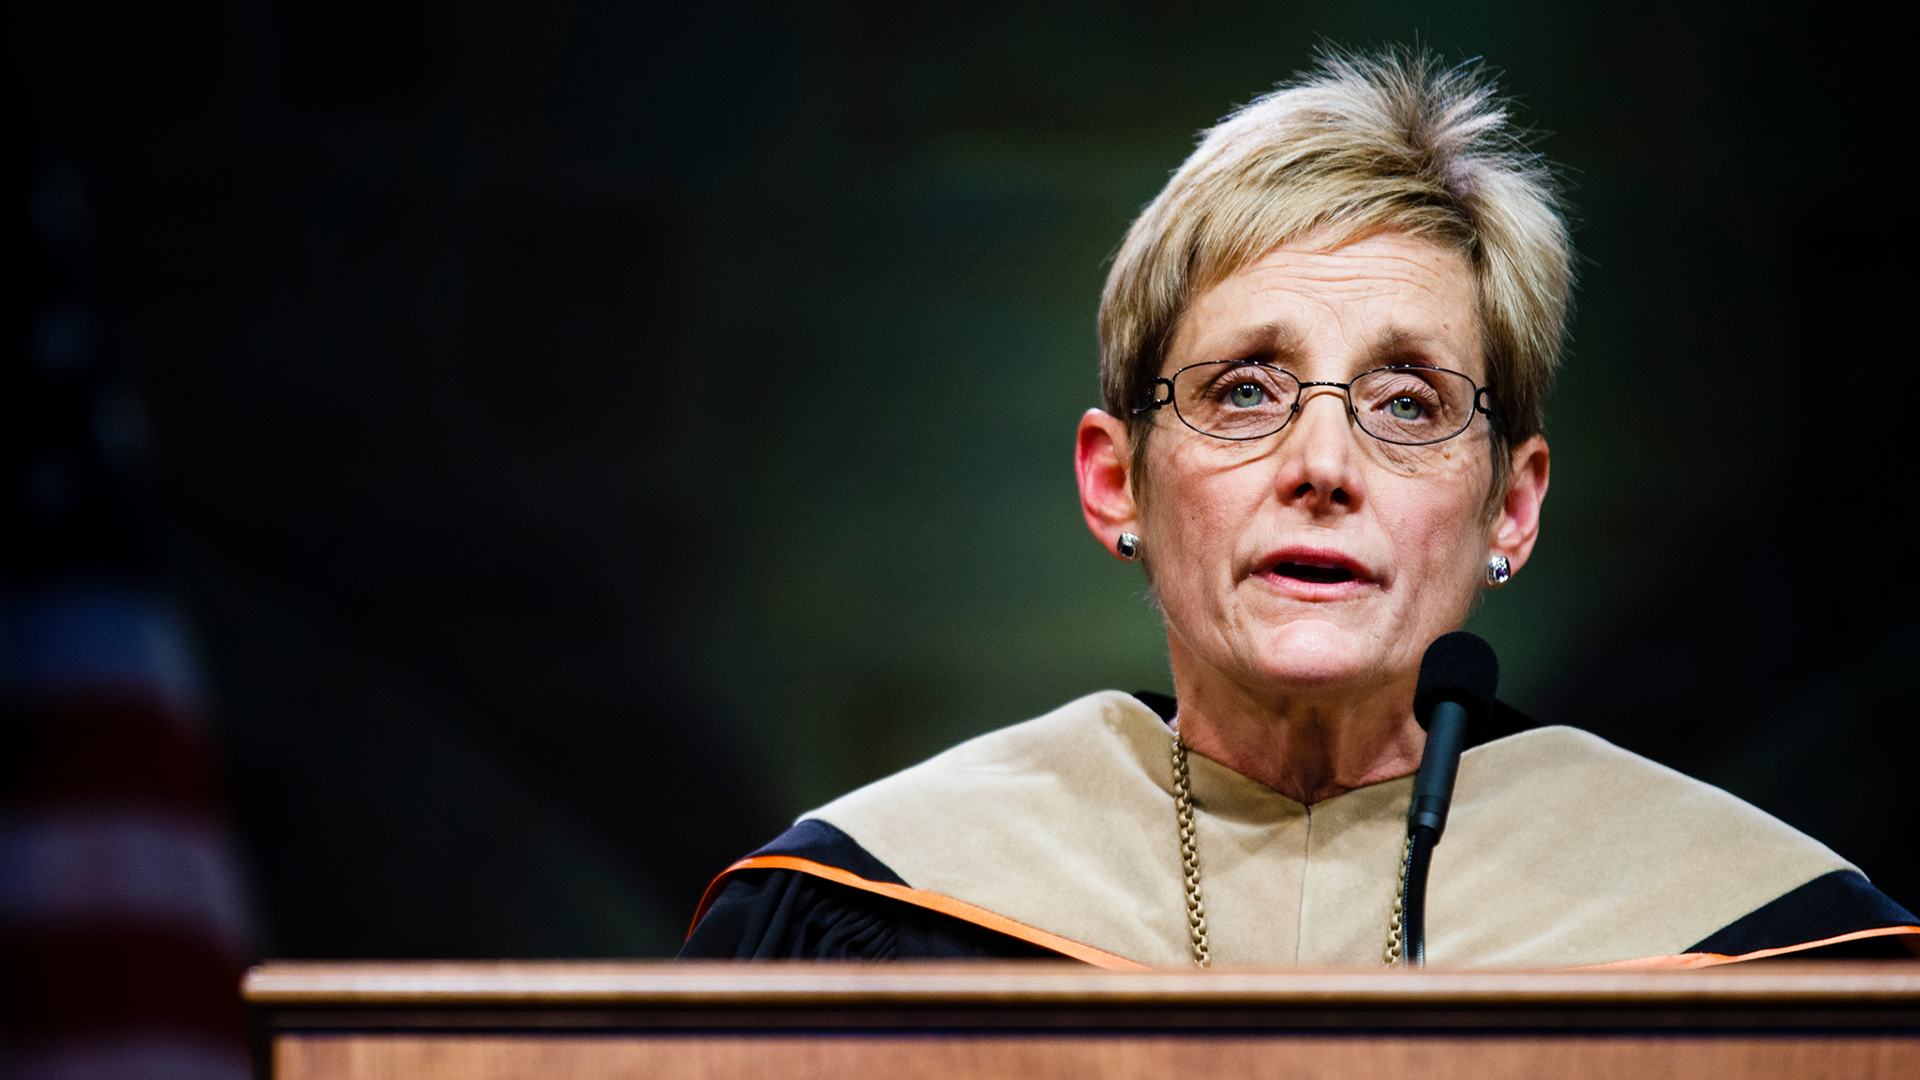 Julie Sullivan speaks from the podium at her inauguration 9 years ago